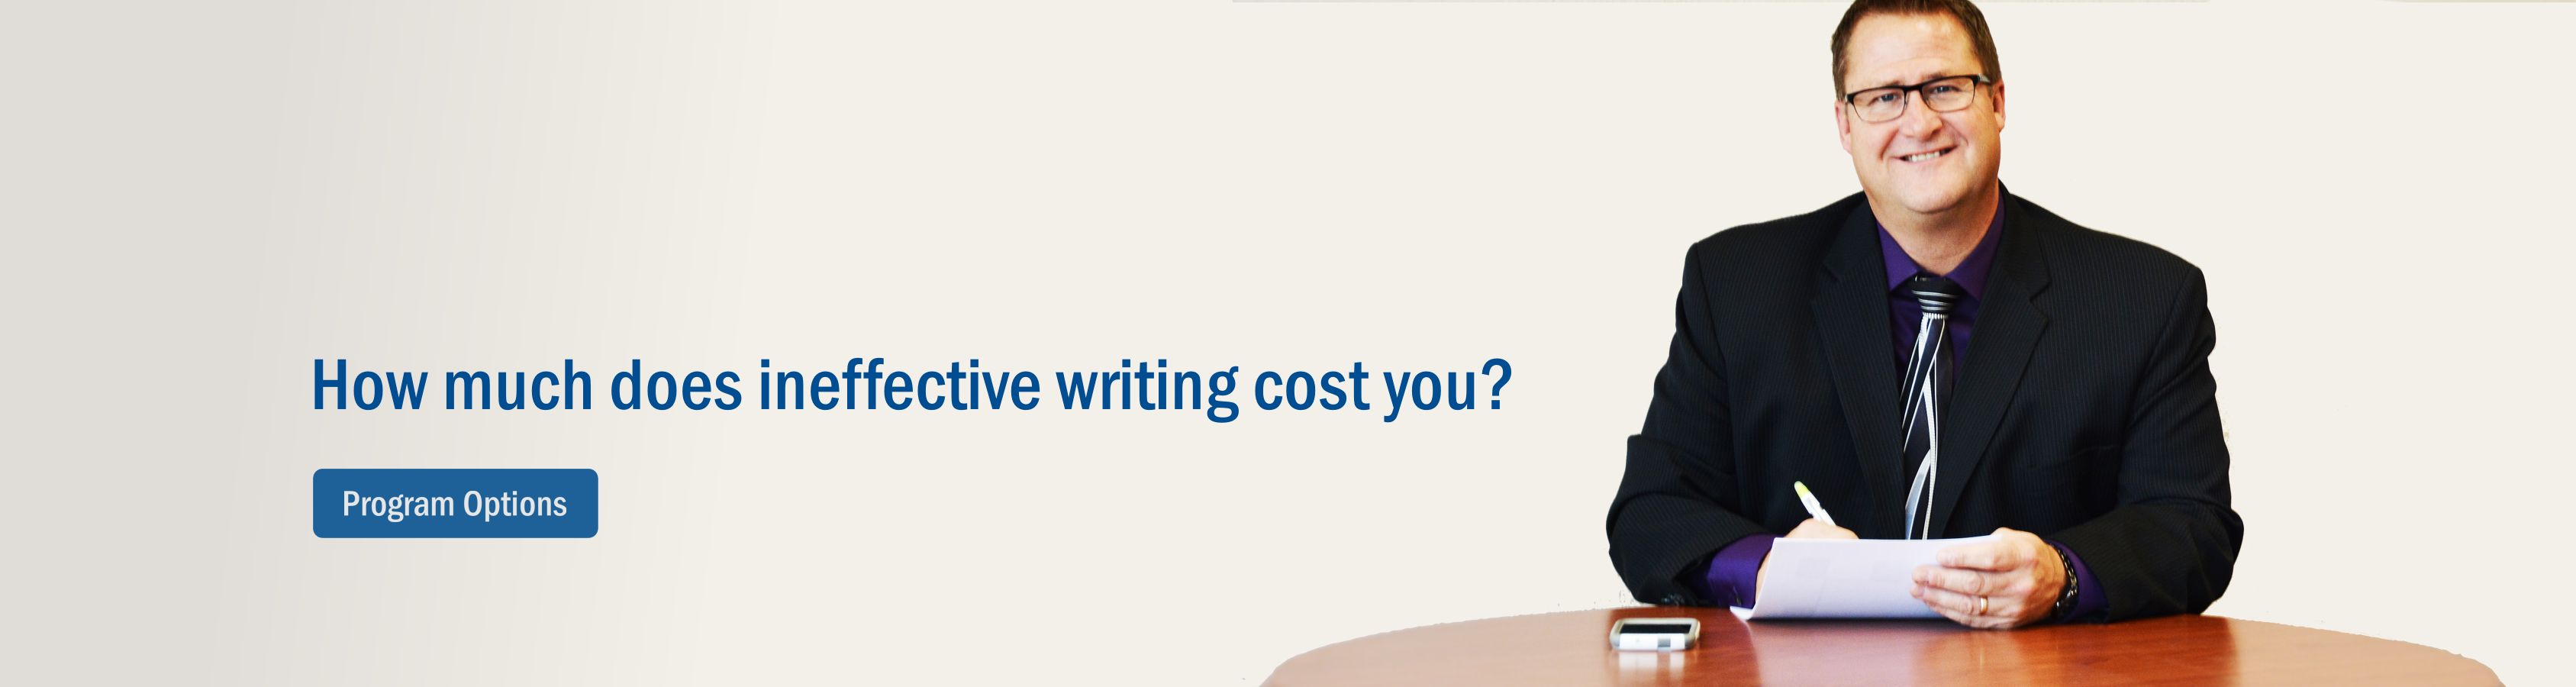 How much does ineffective writing cost you?